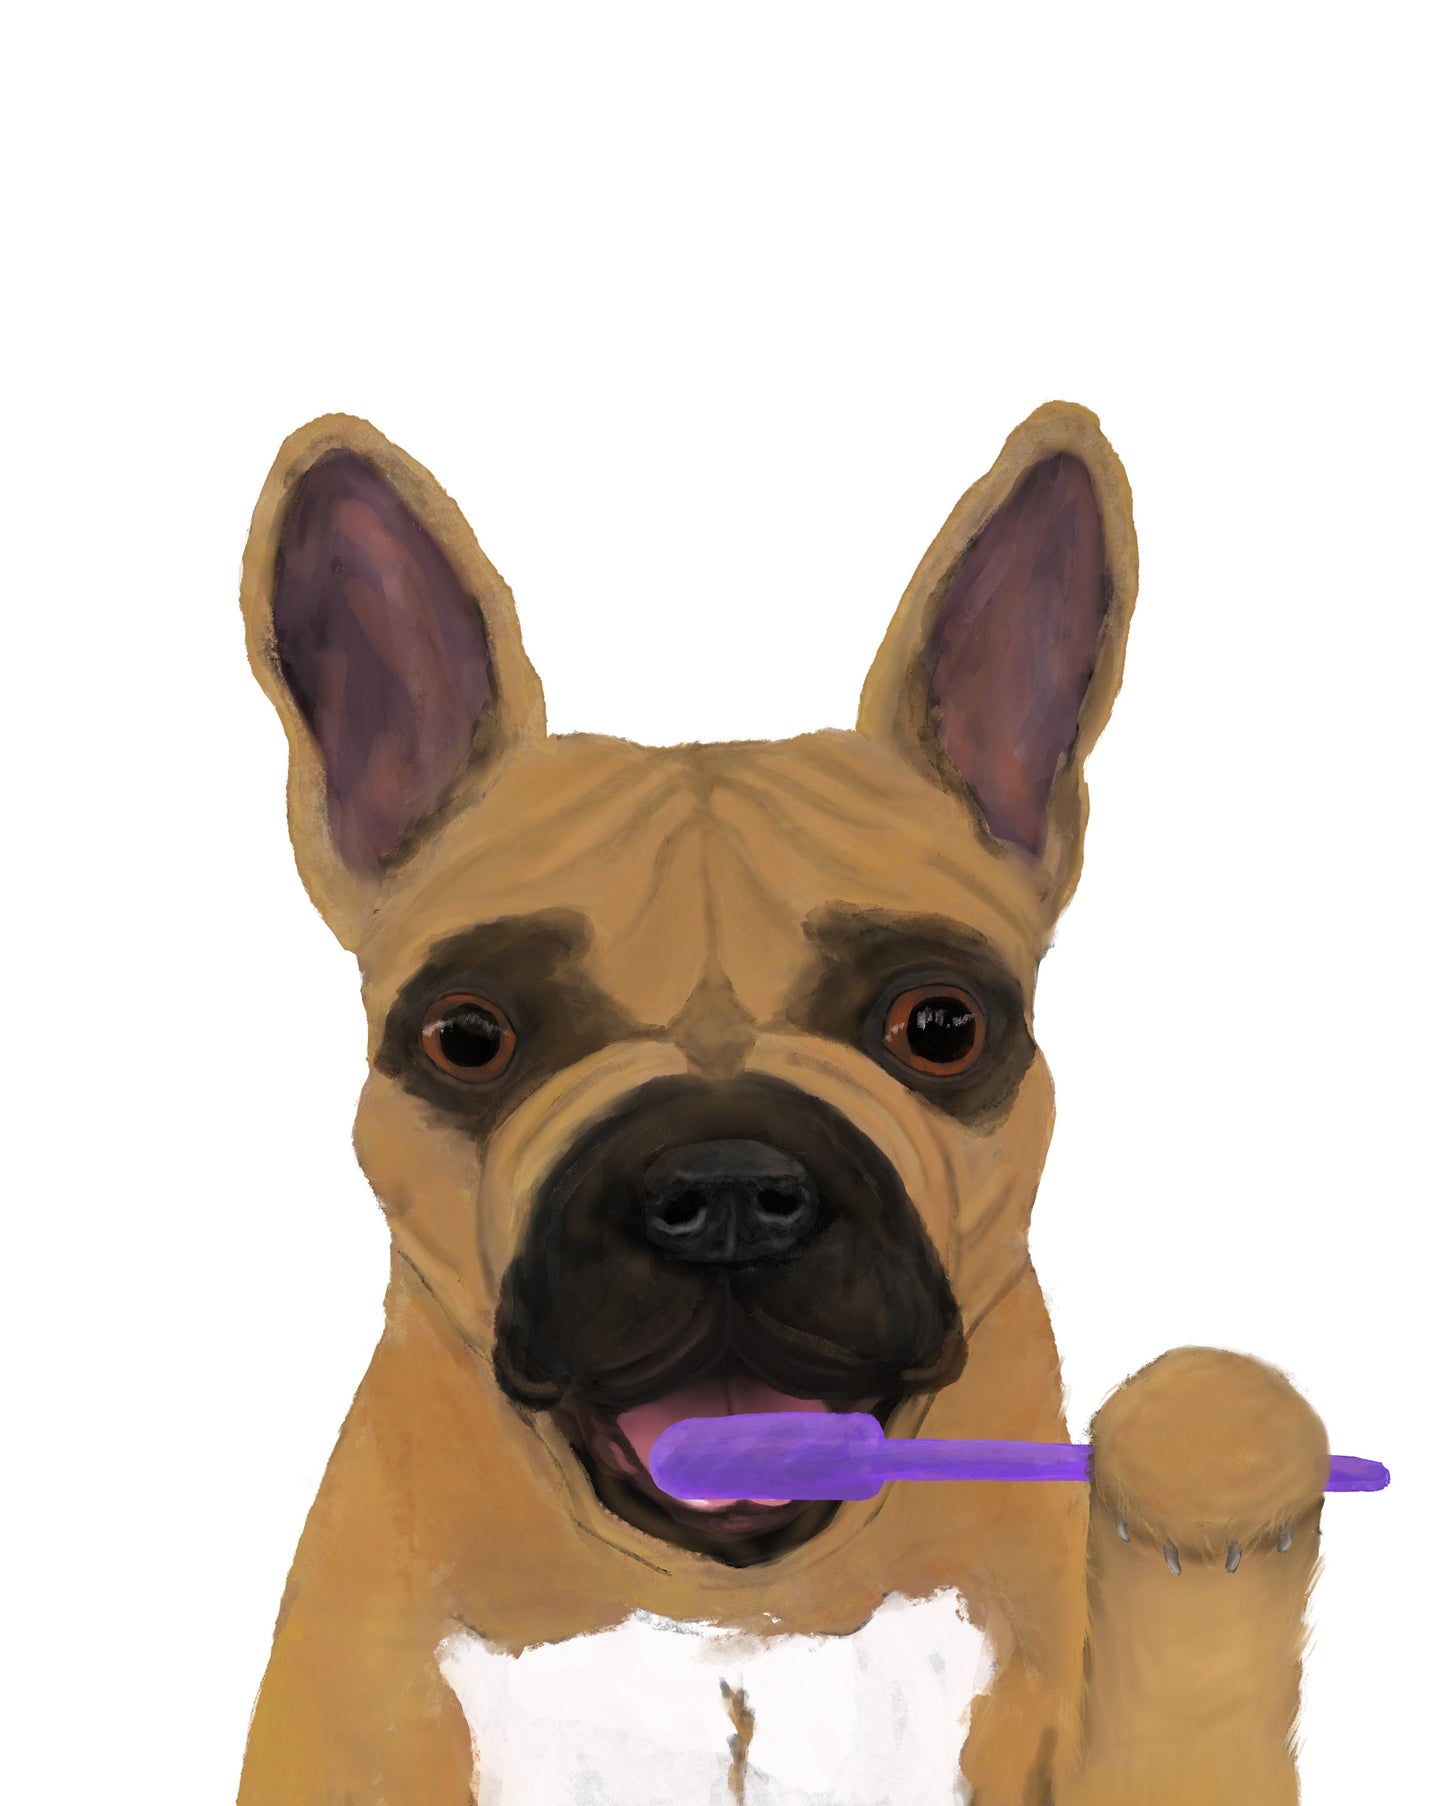 French Bulldog Brushing Teeth Print, Brown Frenchie with Toothbrush, Bathroom Wall Art, Dog Painting, Dog In Bath Illustration, Dog Lover